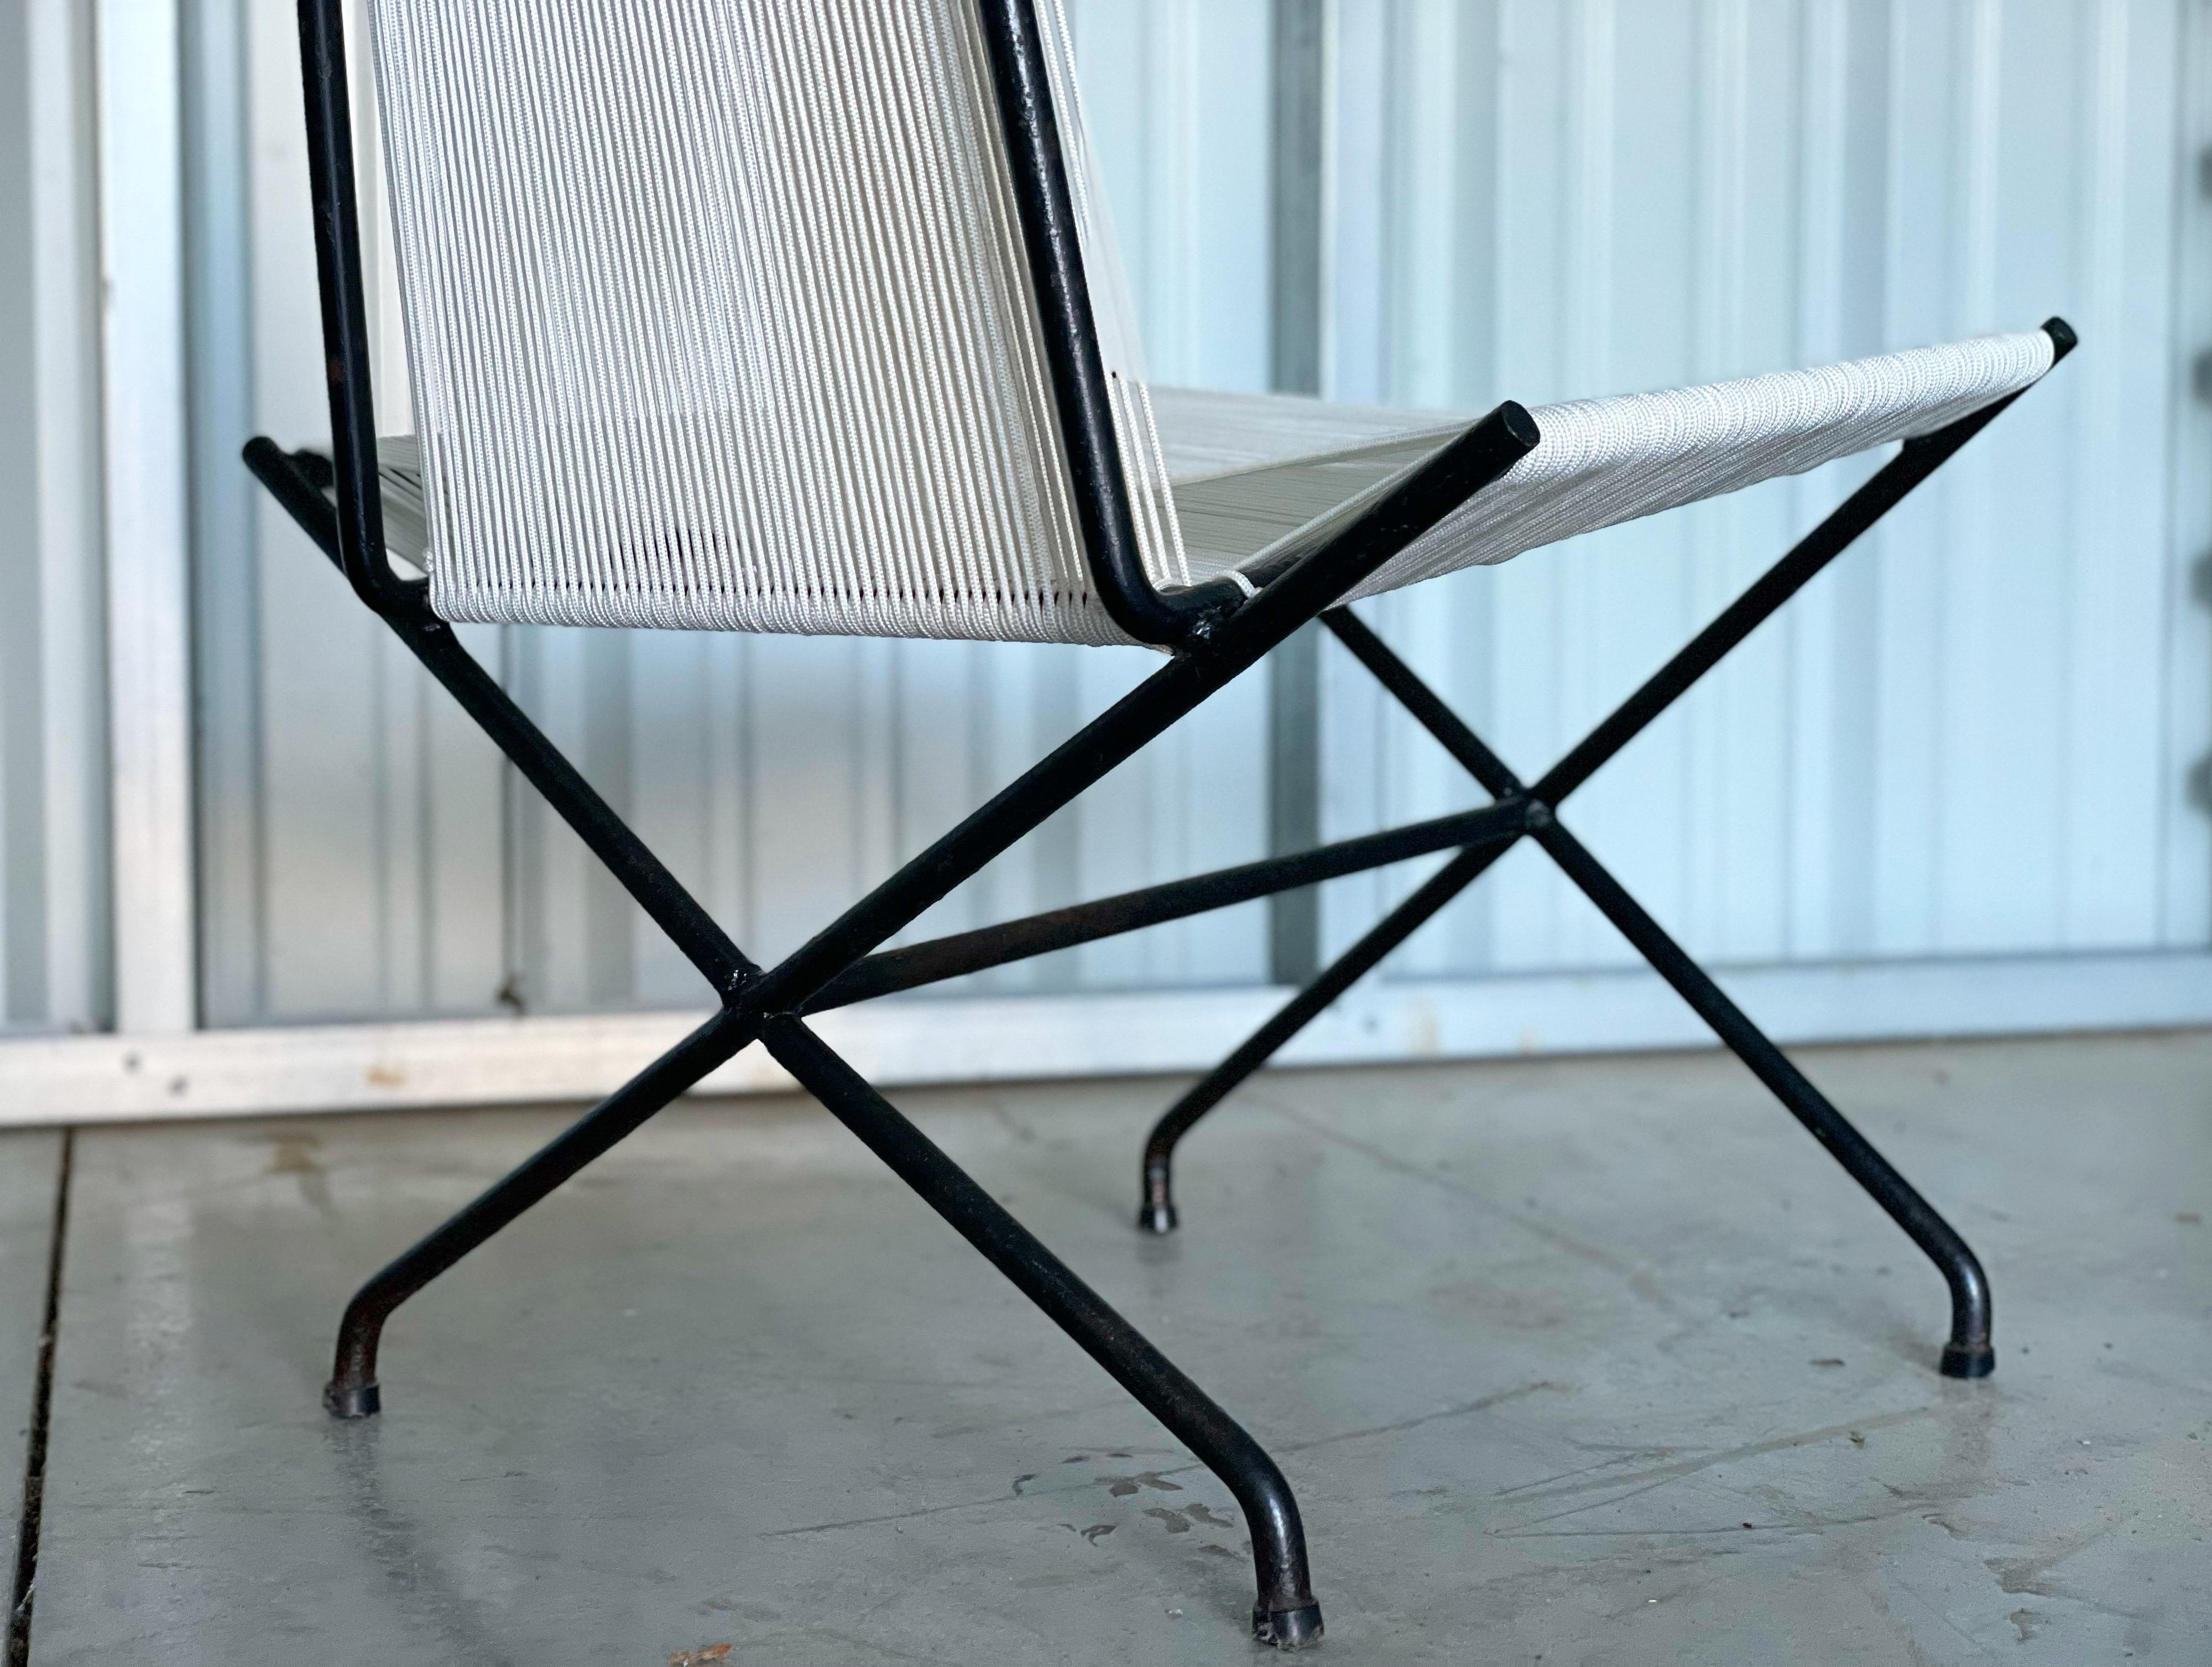 North American Pair Midcentury Wrought Iron String Lounge Chairs by Gunnar Birkerts For Sale